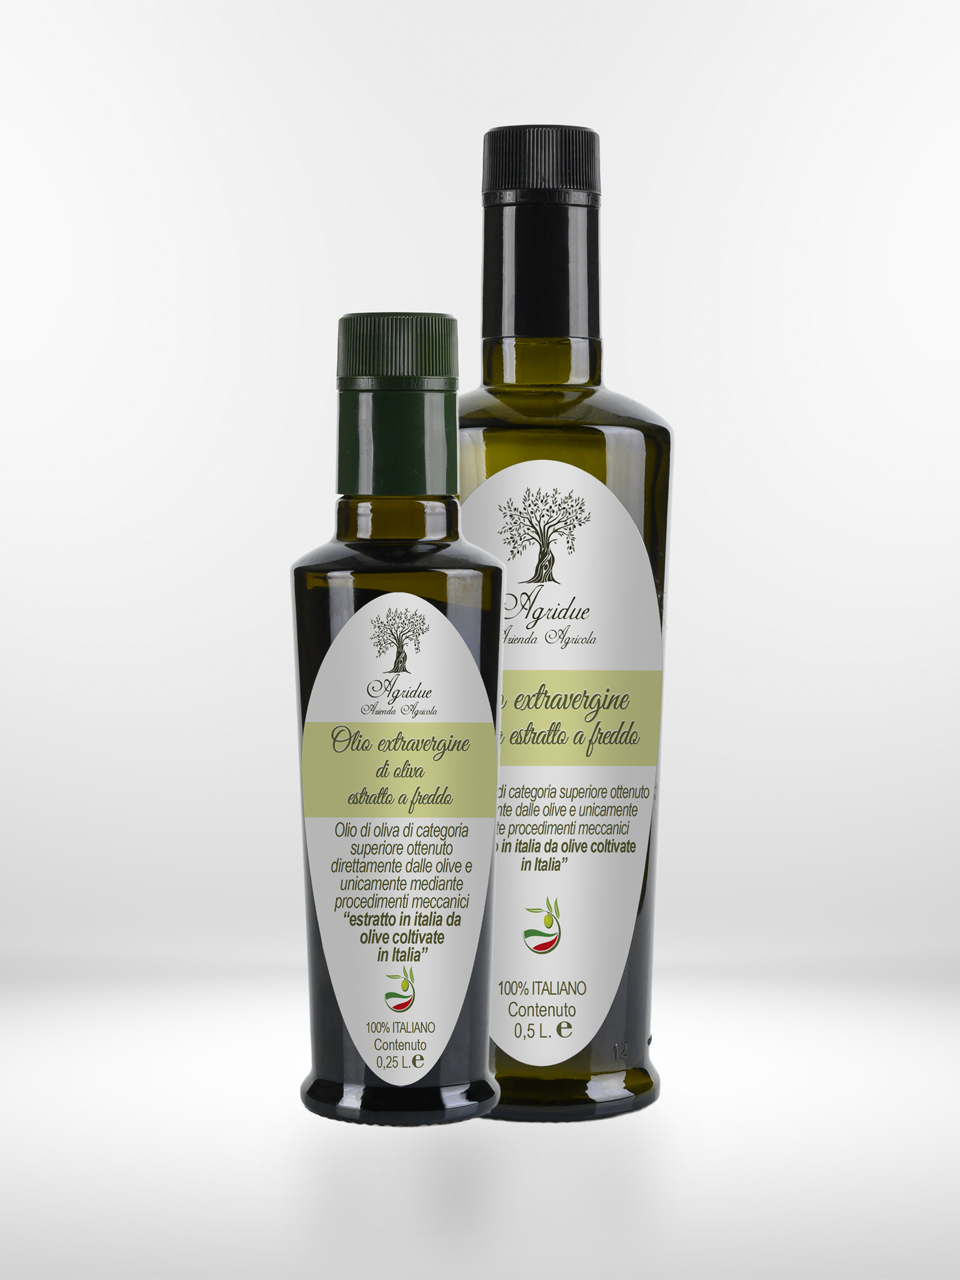 Two bottles of olive oil on a white background. Agridue multivarietal oil, available in different formats.